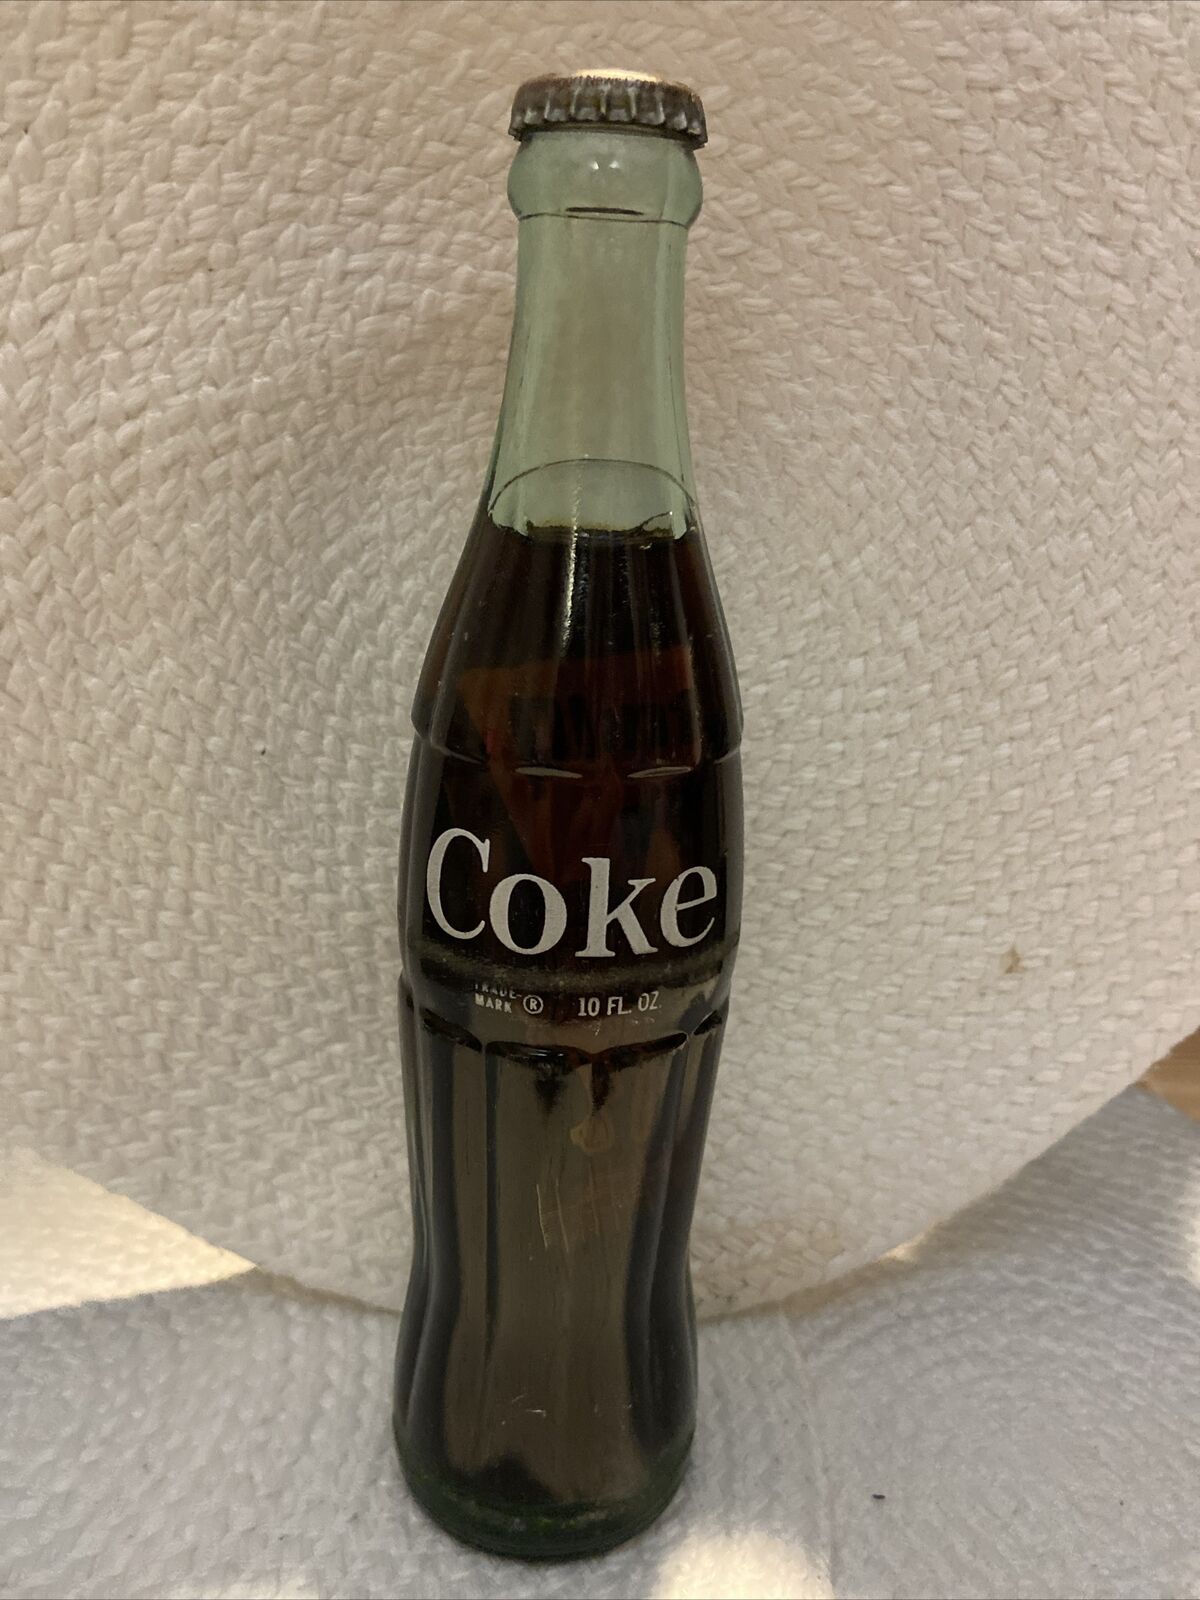 Coca-Cola Unopened Purchased In 1968 Has Planters Peanut Bag Inside Bottle